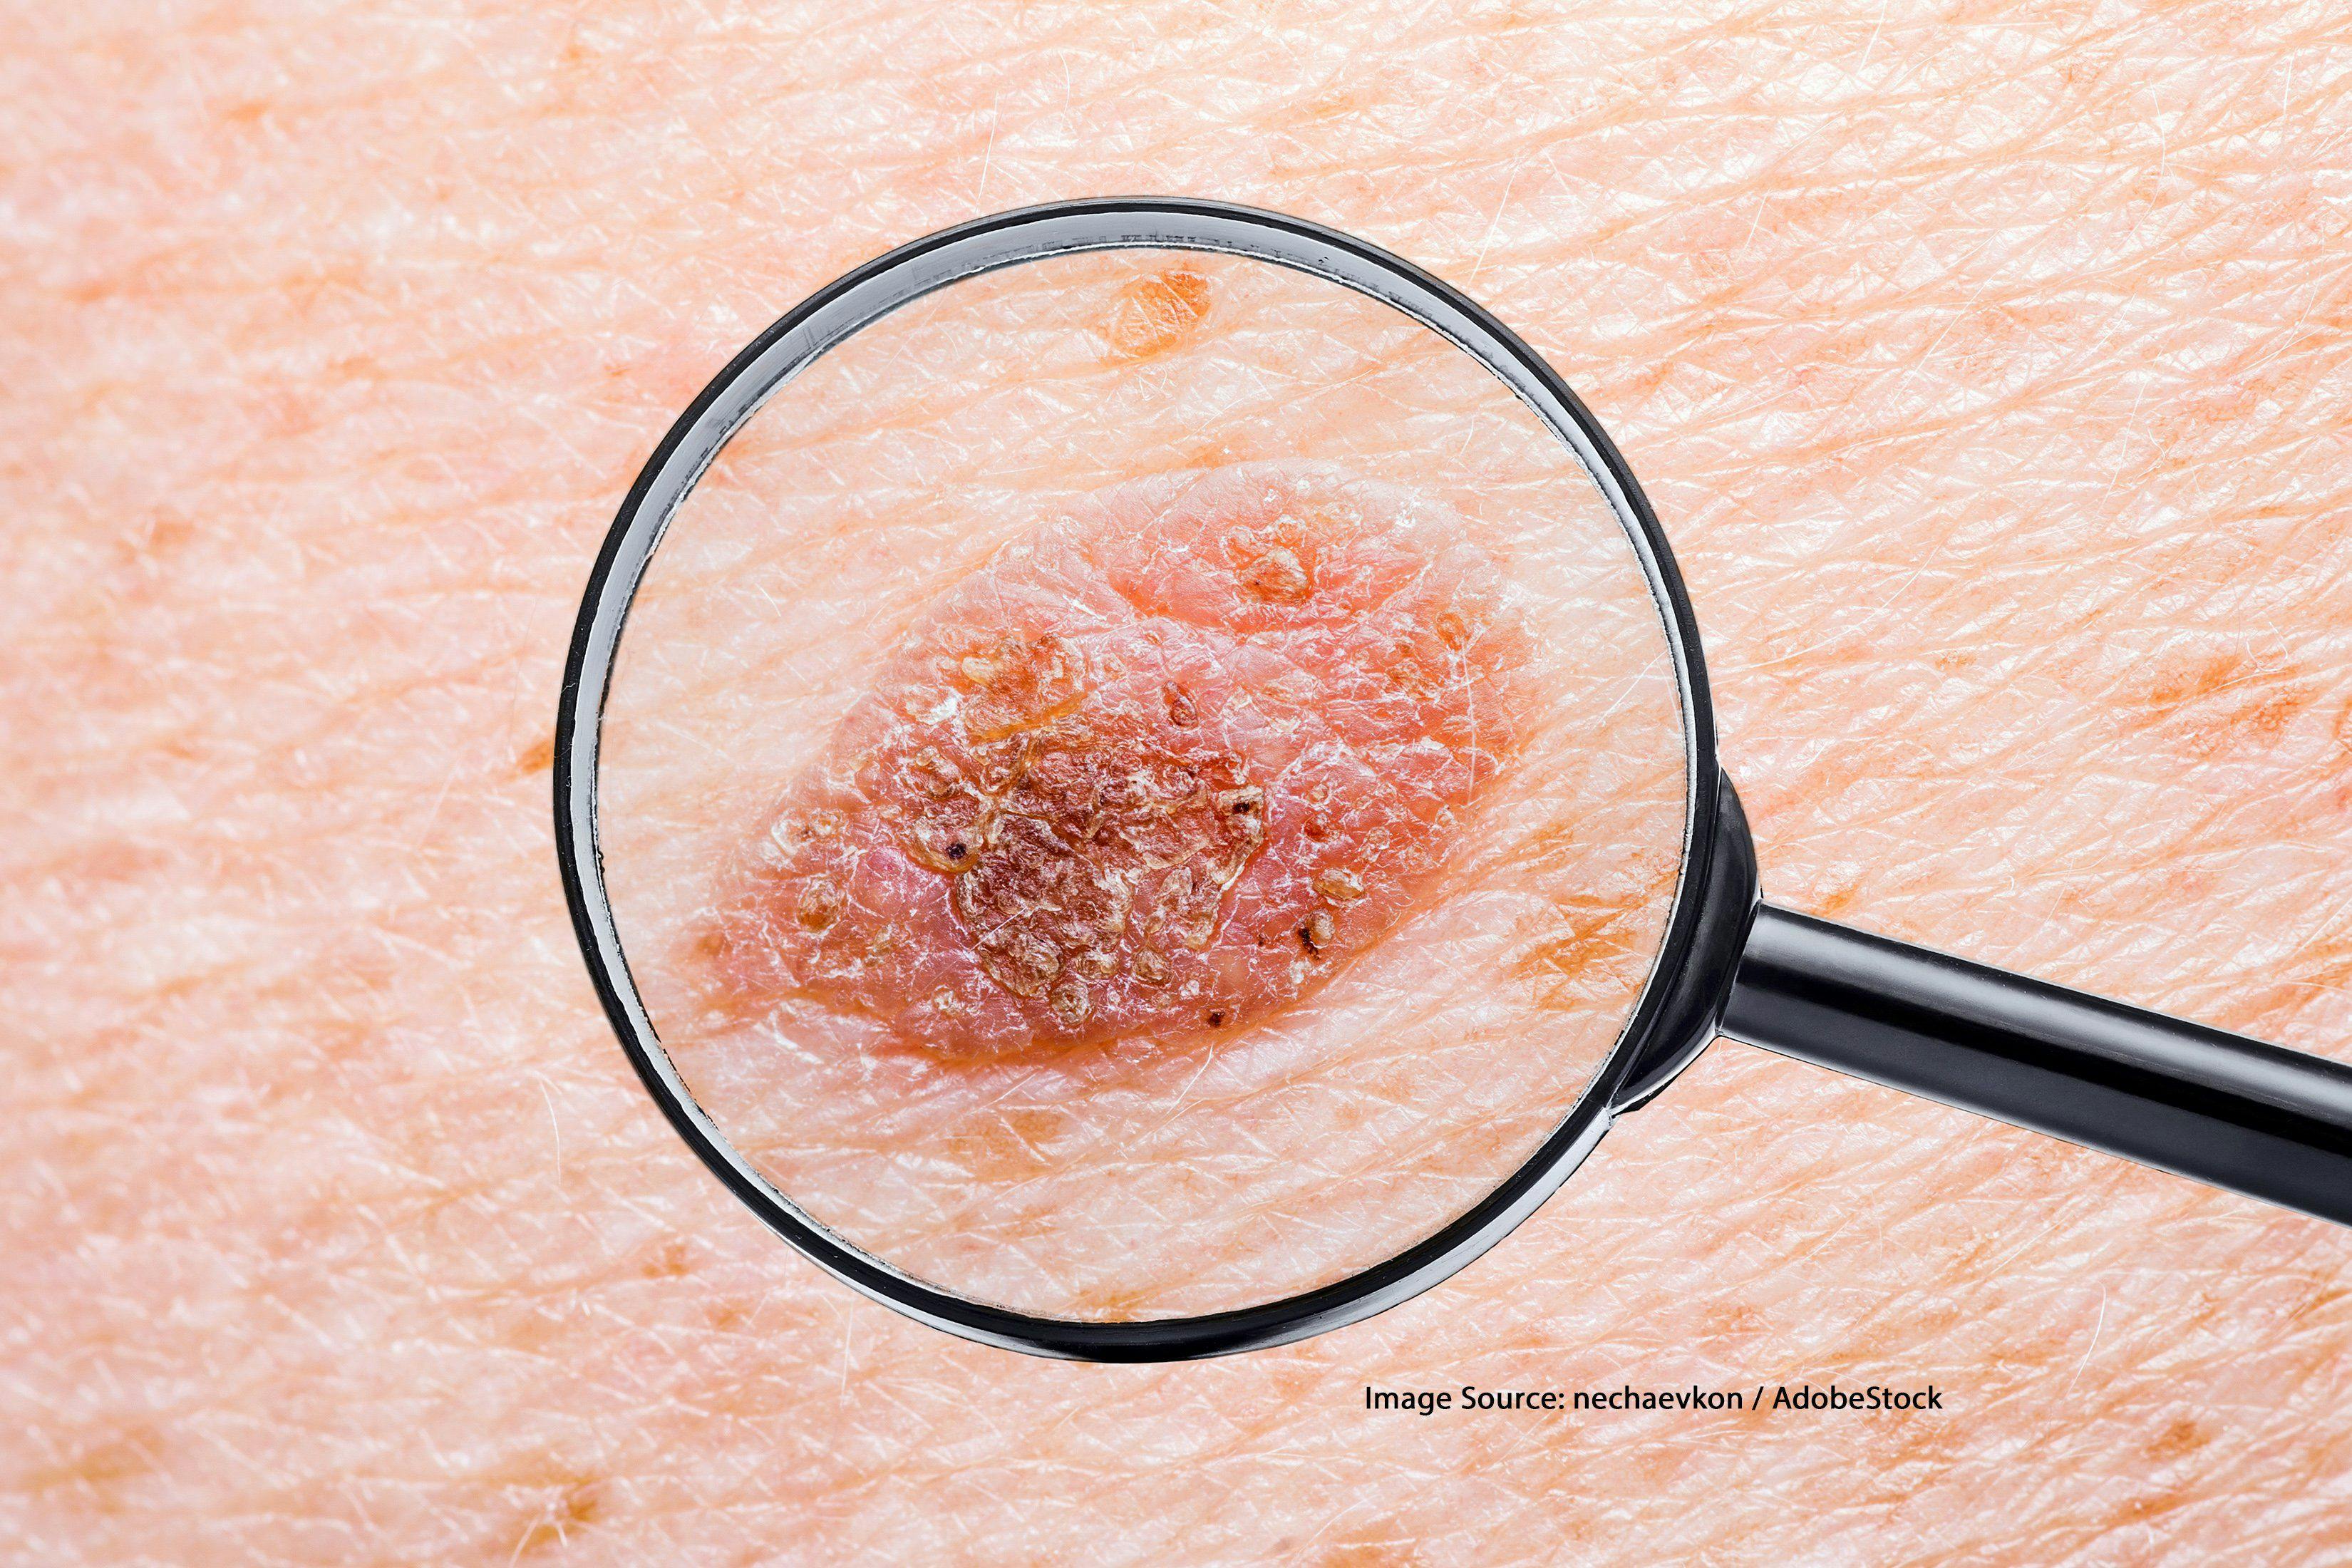 Are Thin, Early-Stage Nodular Melanomas Really Low-Risk?